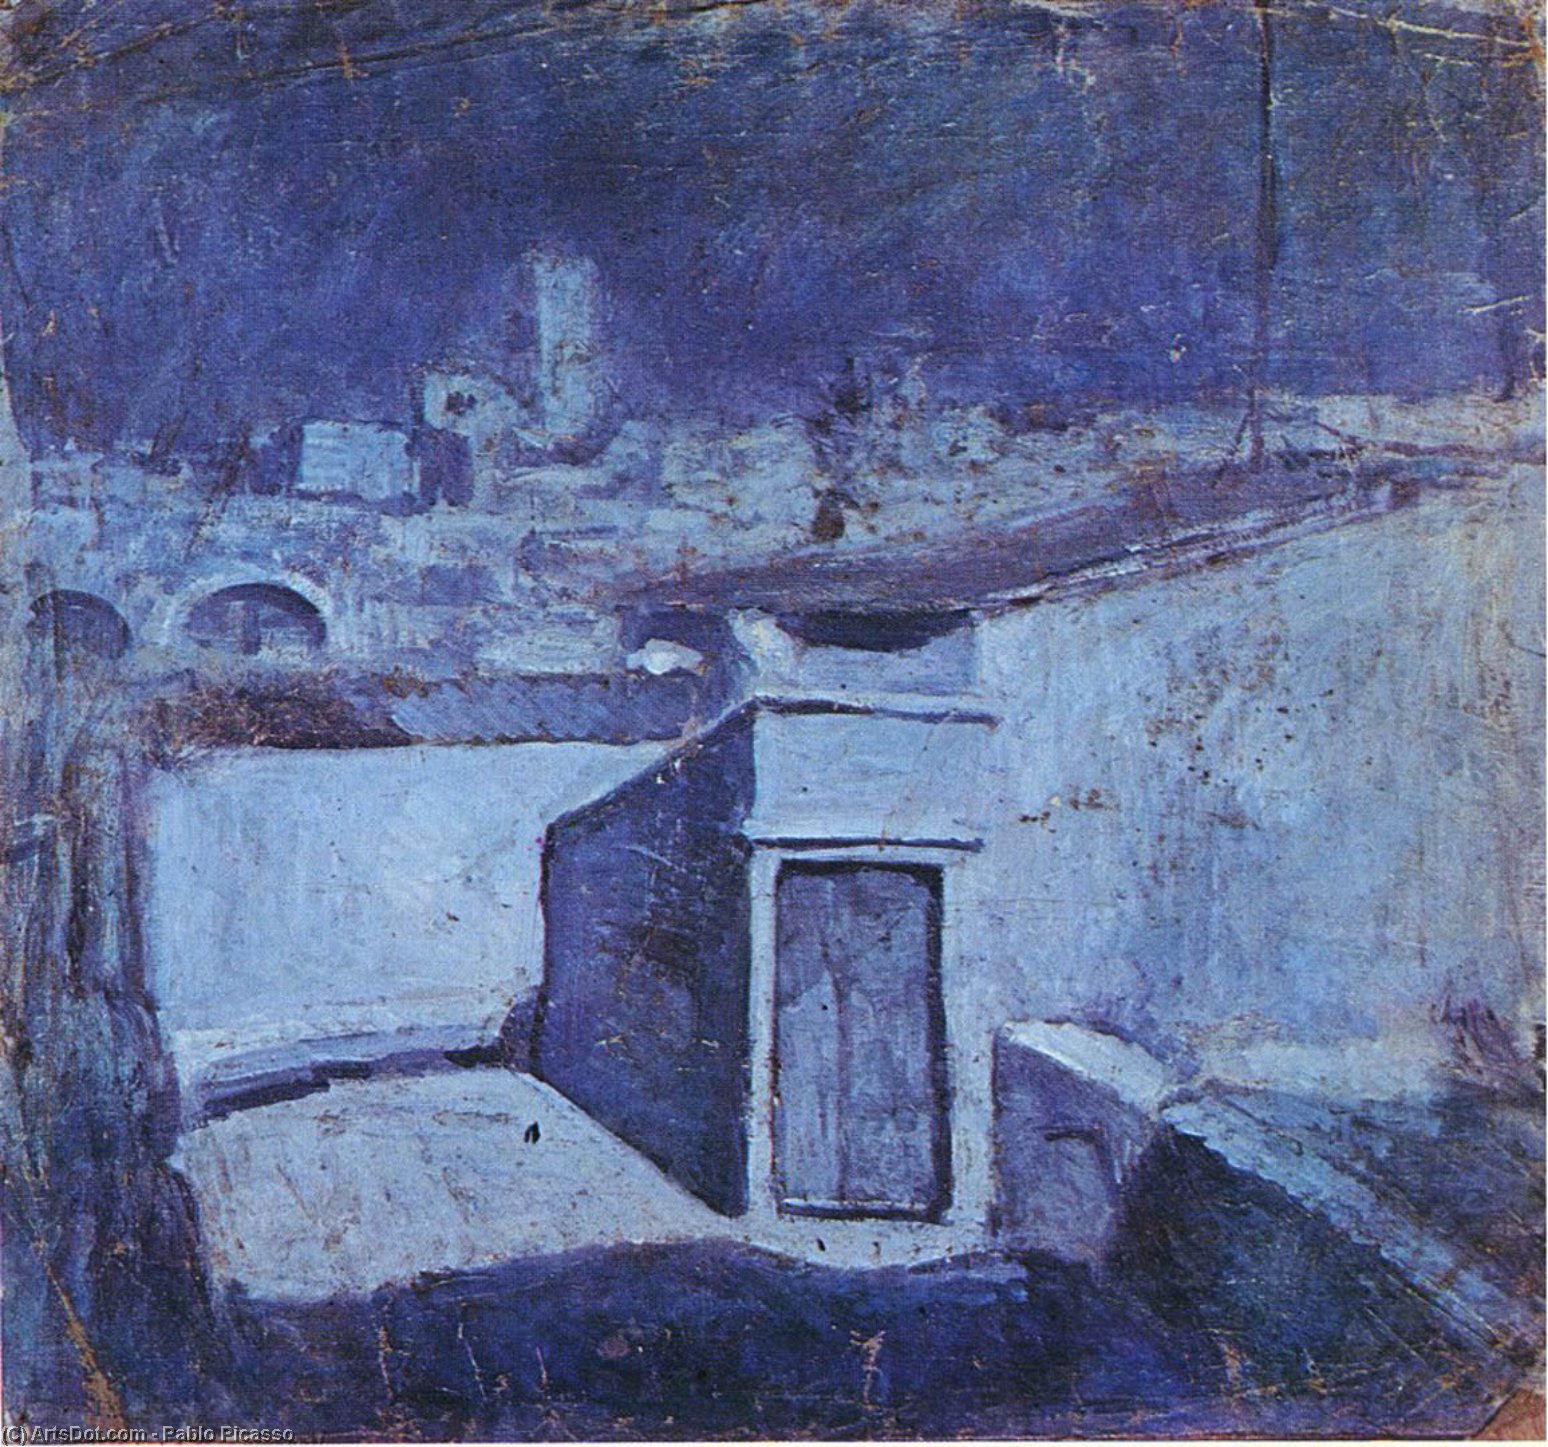 WikiOO.org - 백과 사전 - 회화, 삽화 Pablo Picasso - The roofs of Barcelona in the moonlight